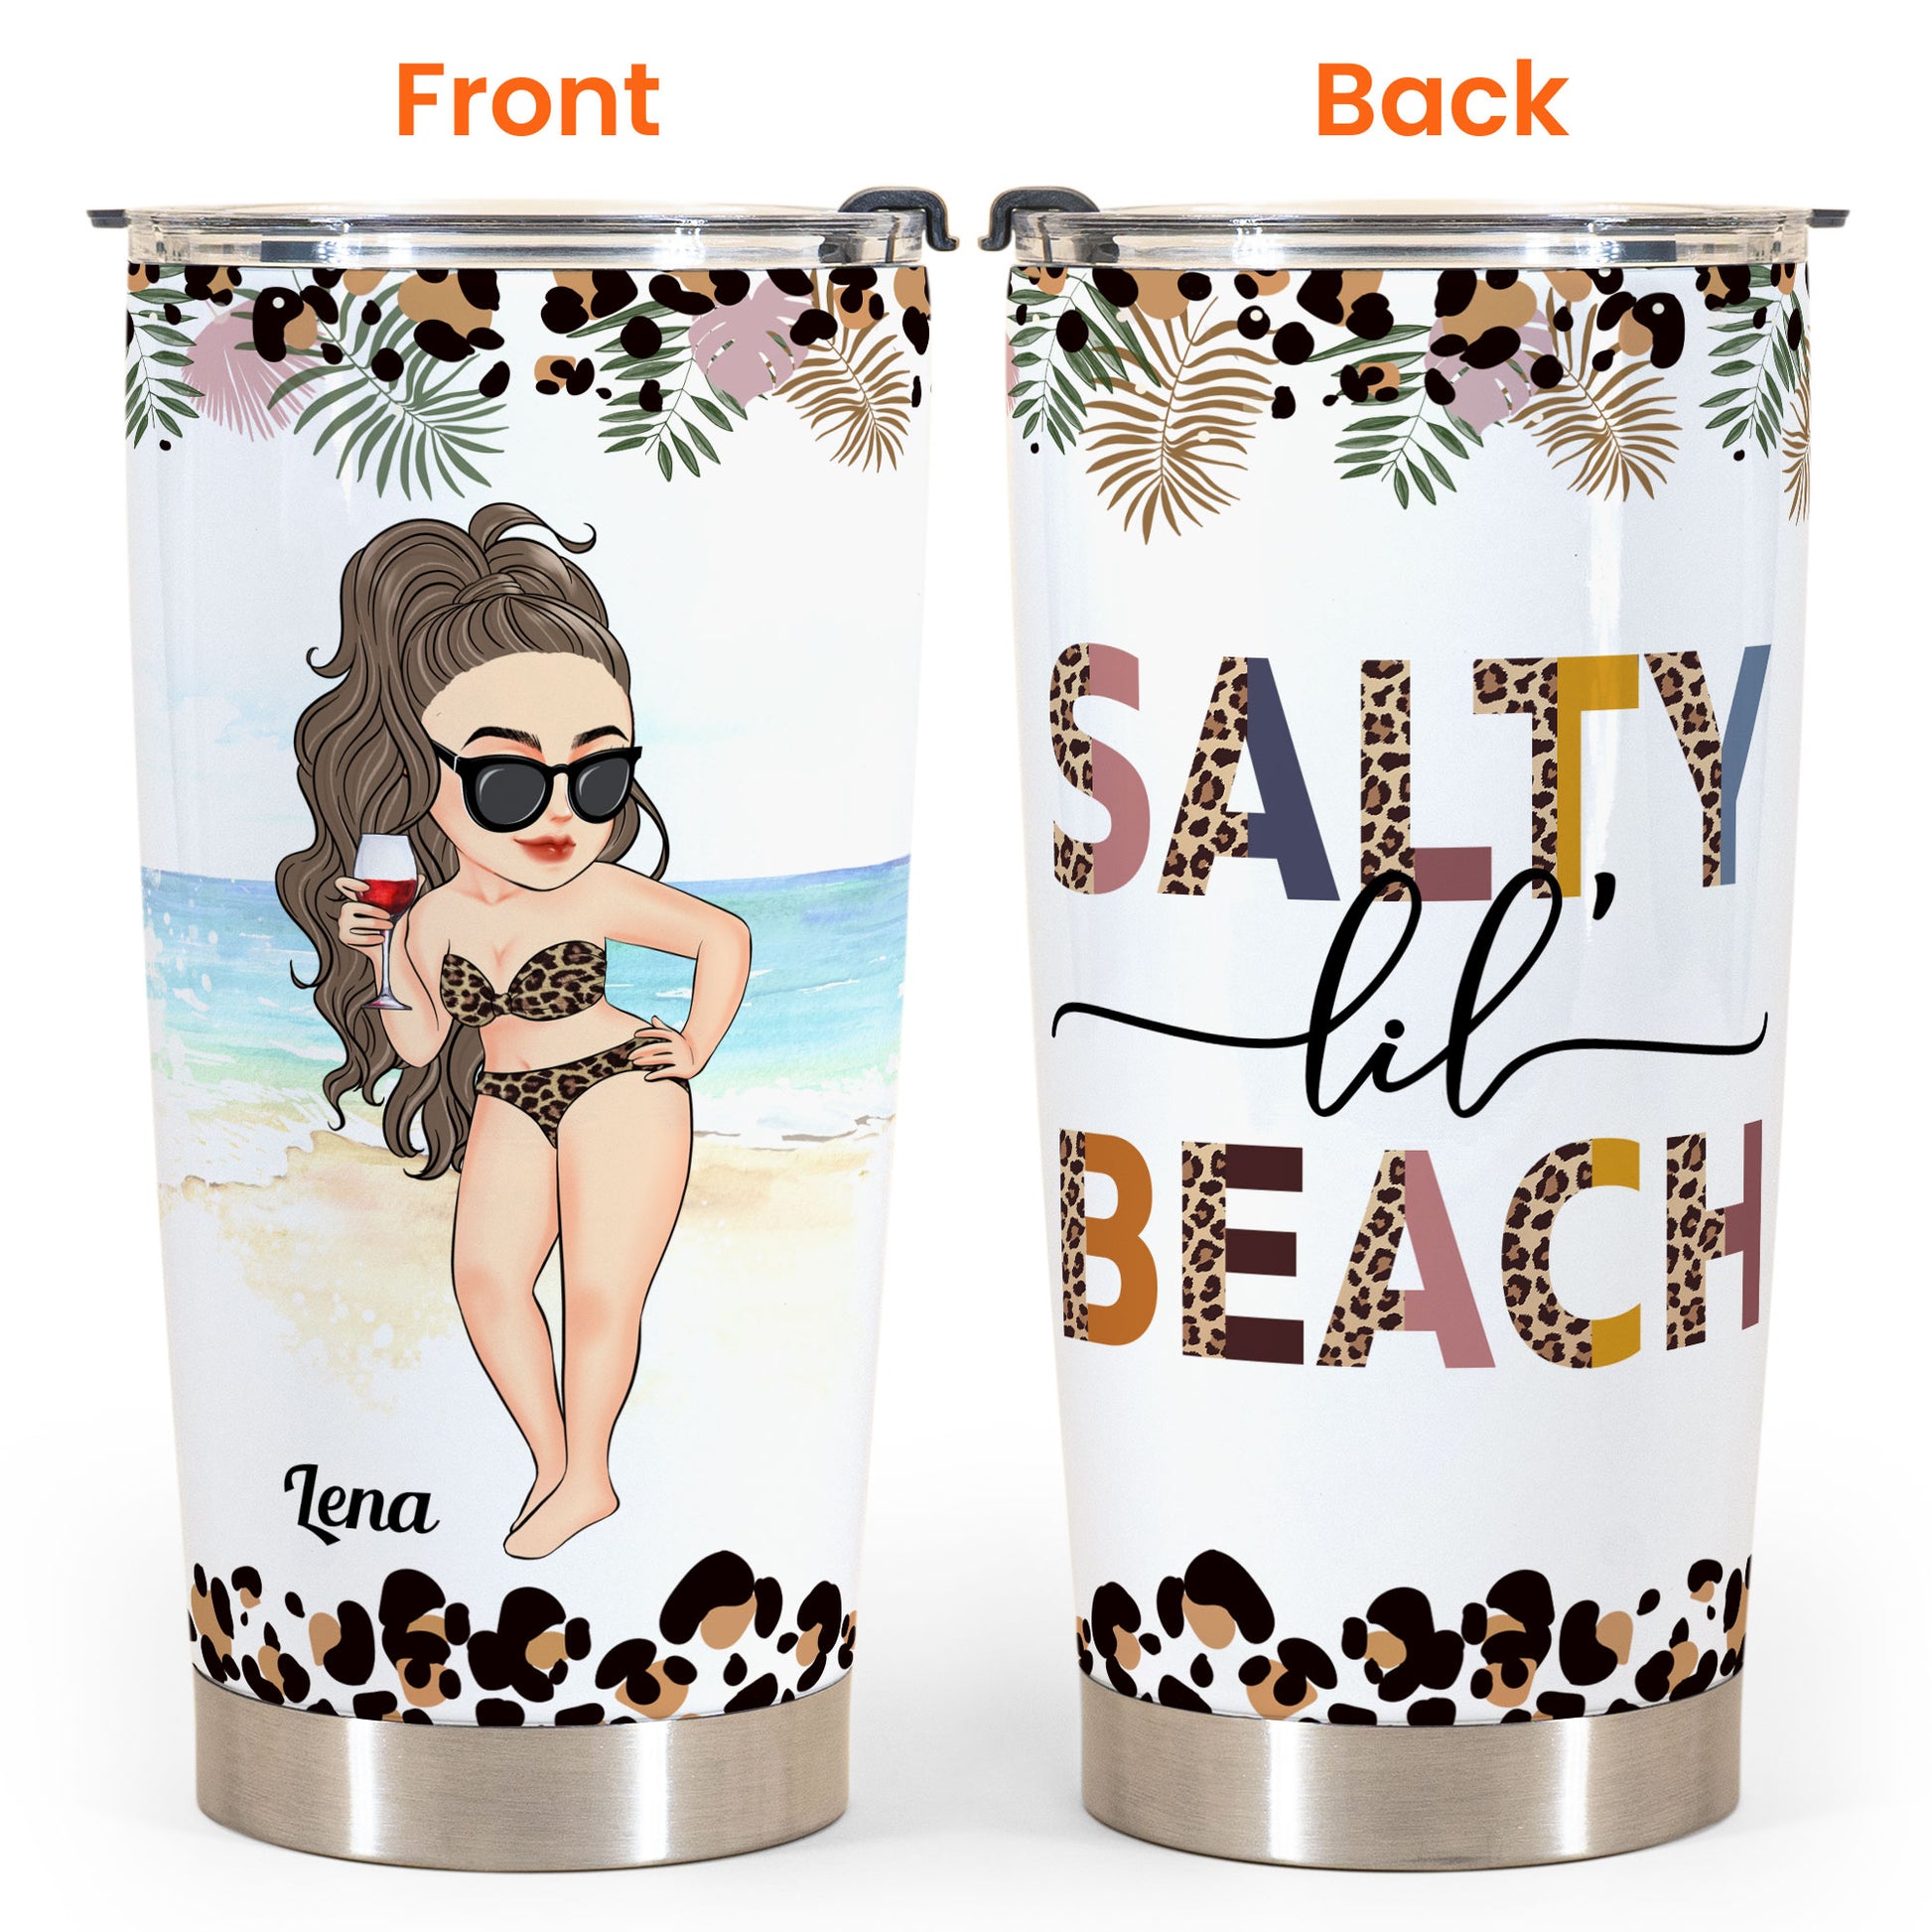 Salty Lil' Beach - Personalized Skinny Tumbler - Summer Gift For Her, Beach Lover, Traveling, Girl, Vacation Gift